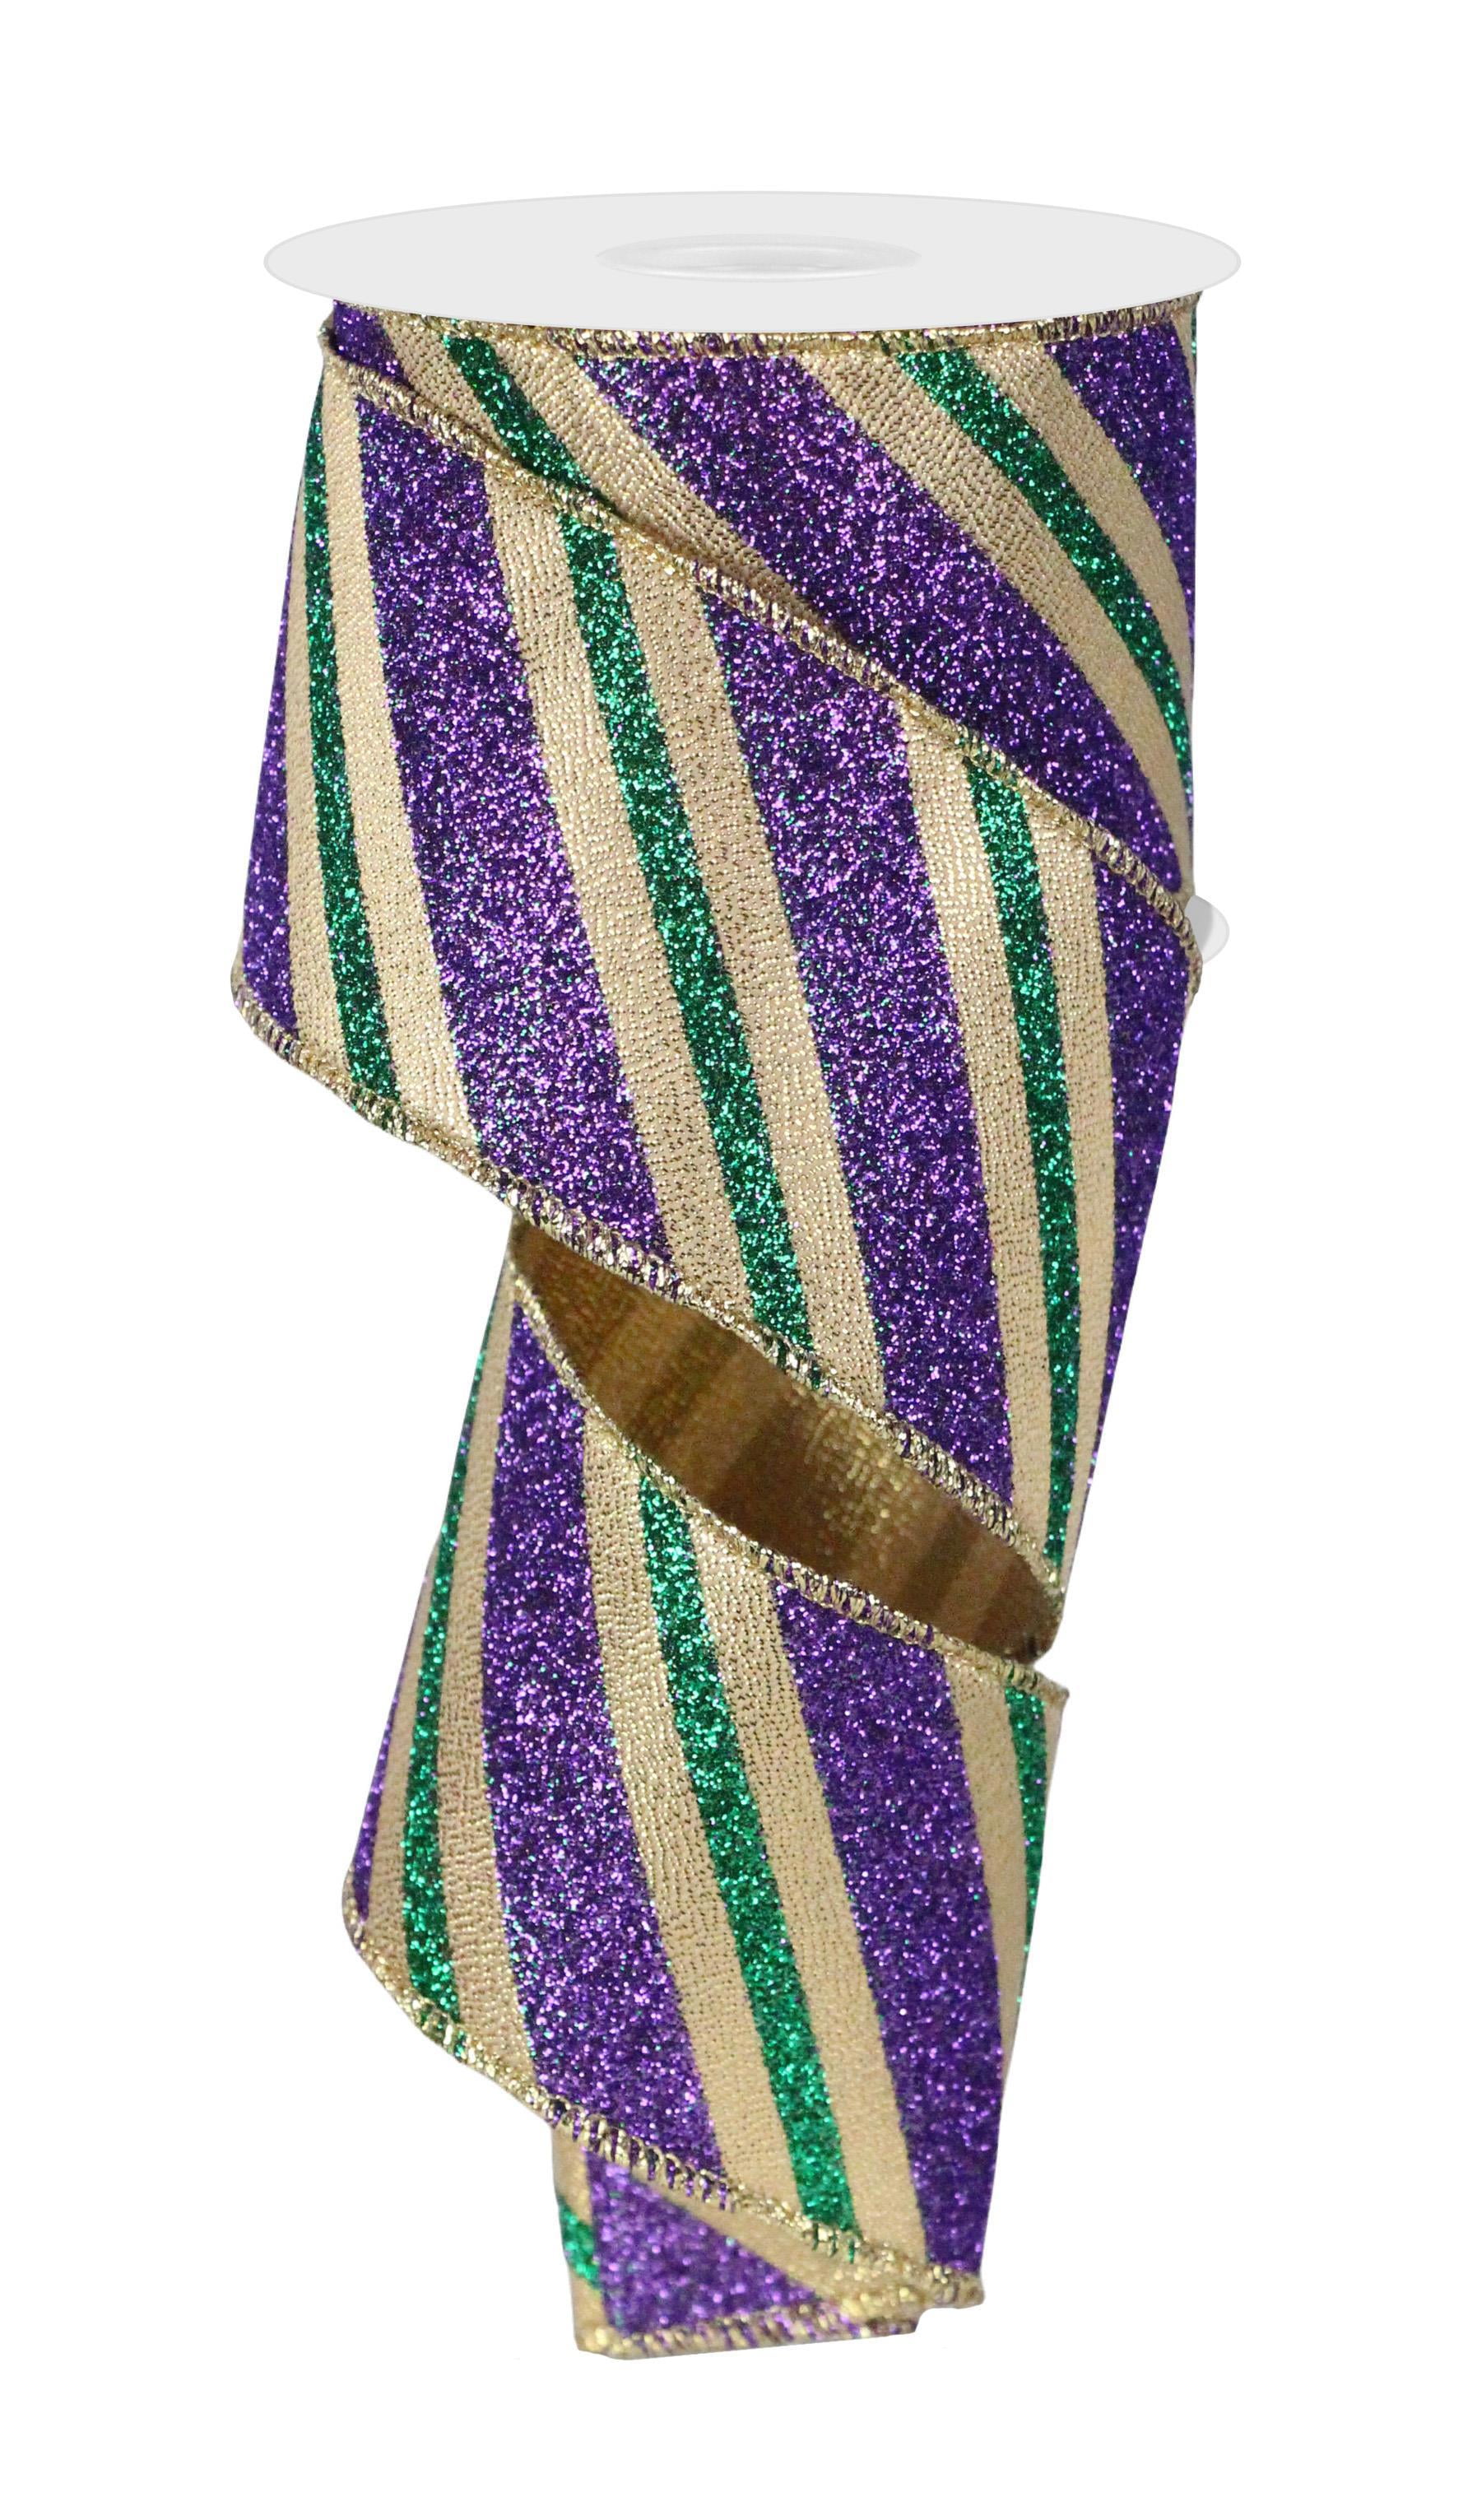 Glitter Striped Mardi Gras Ribbon - 2 1/2 x 10 Yards, Wired Edges, Purple,  Green & Gold Stripes, Christmas, Bows, Gifts, Wreath, Easter, Fat Tuesday,  Carnival, Spring 